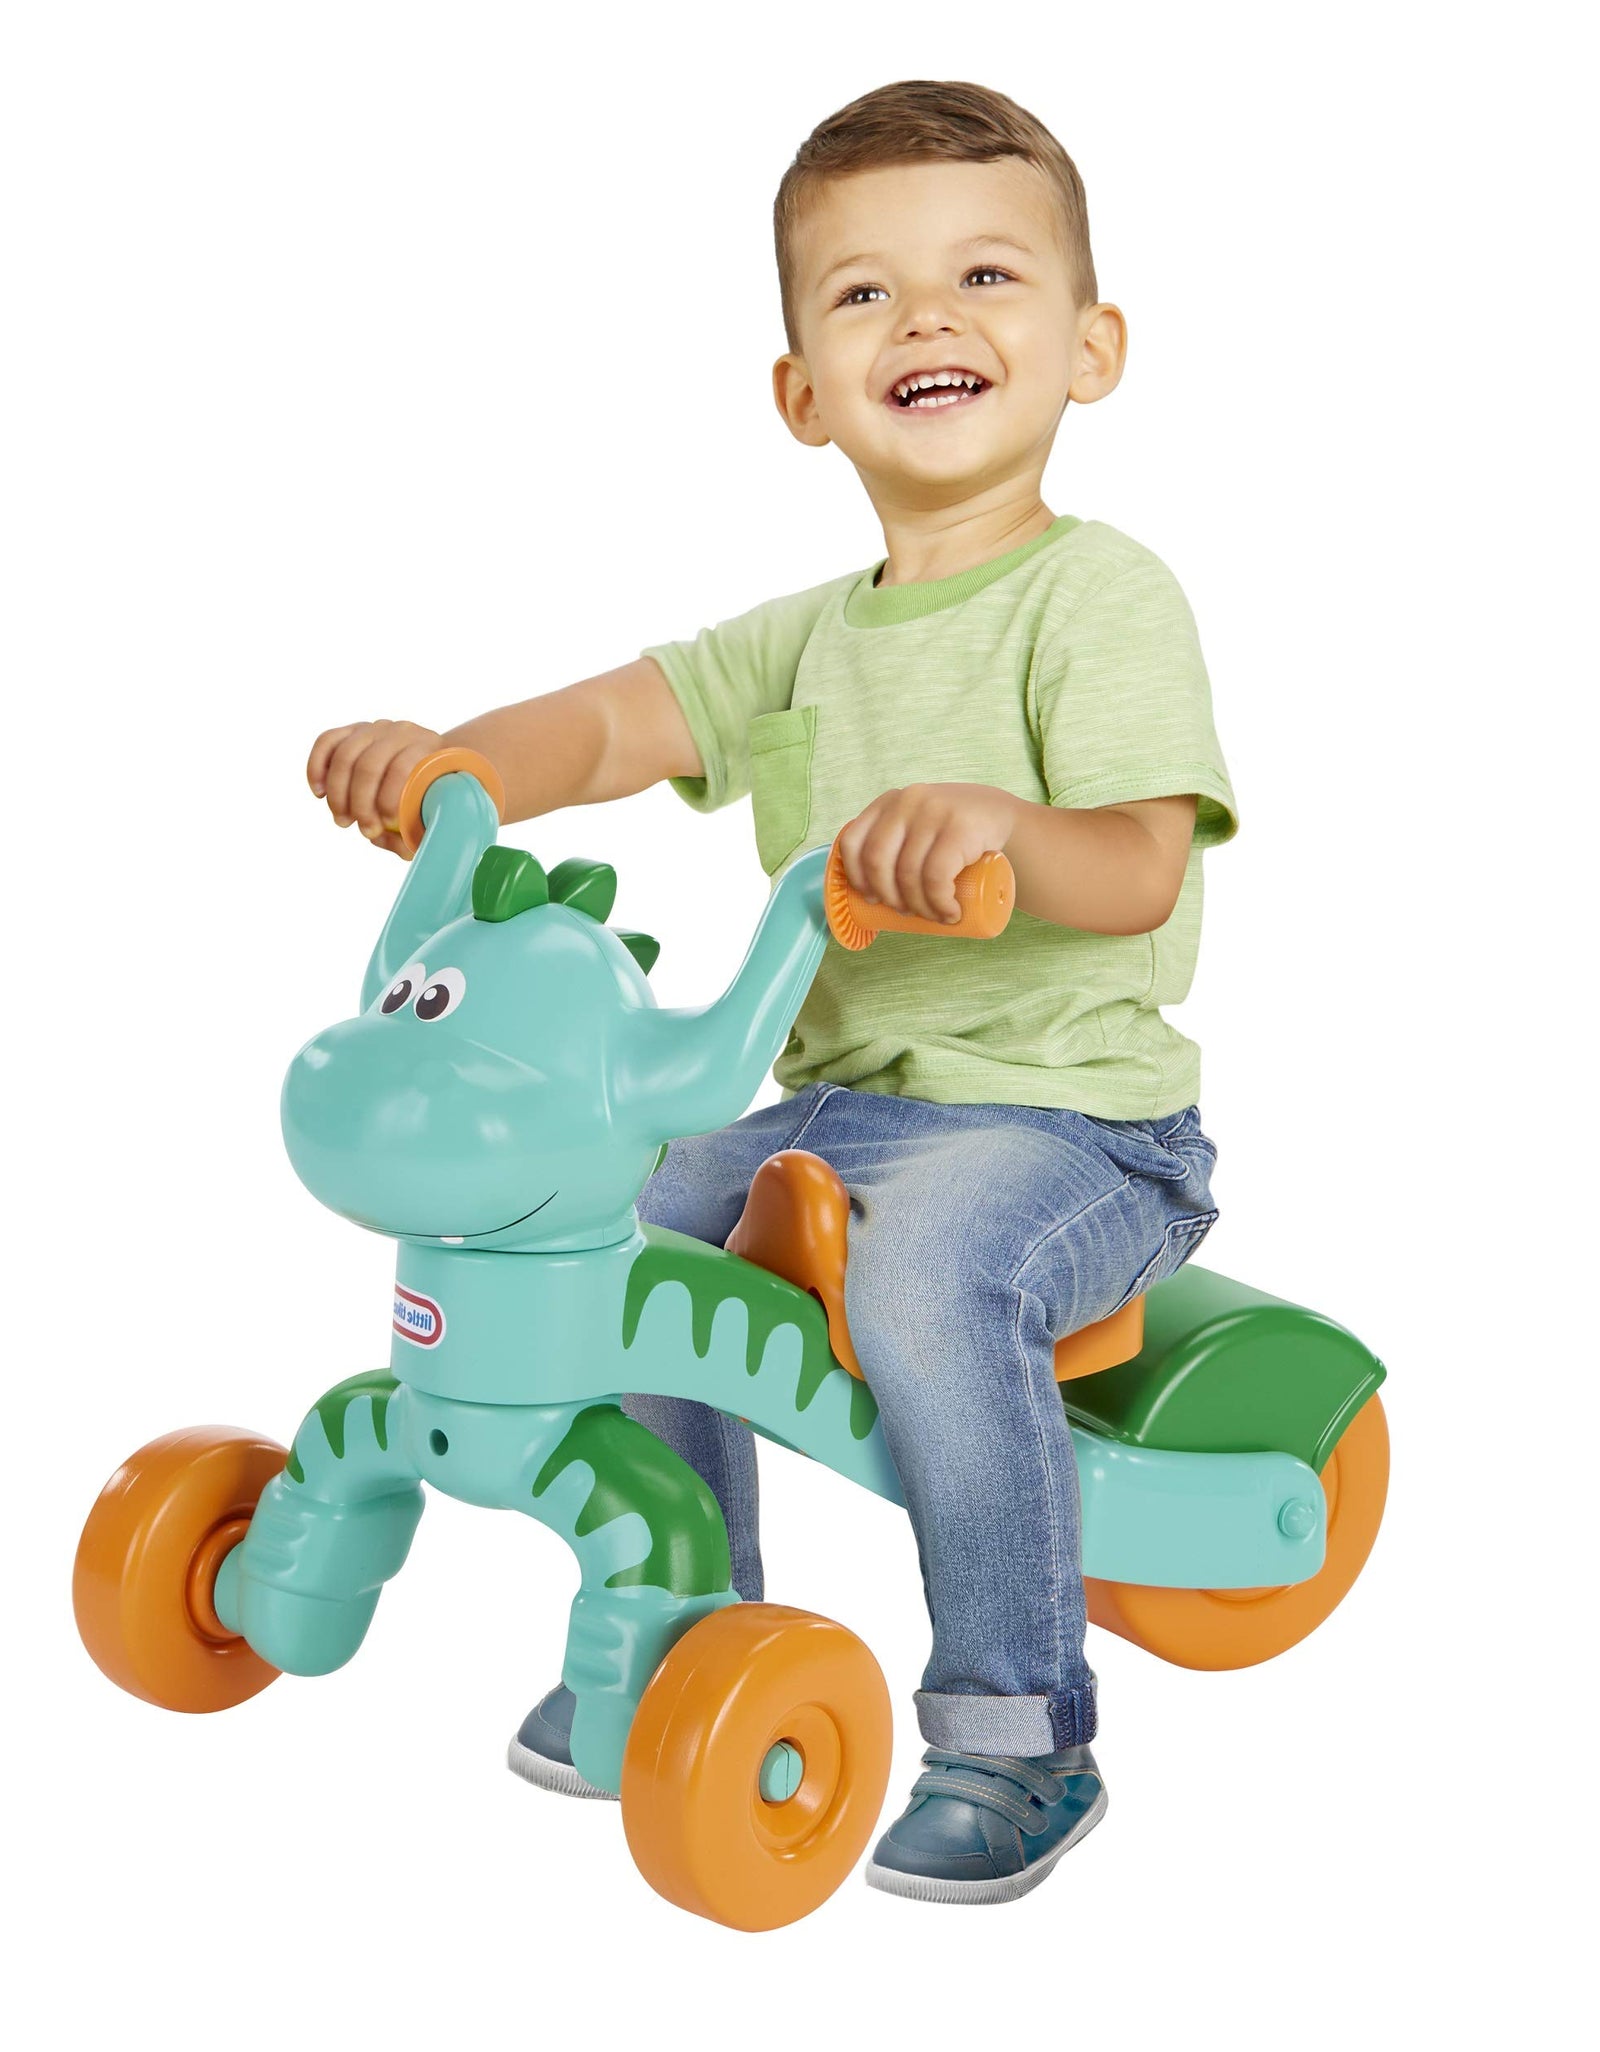 Little Tikes Go and Grow Dino Indoor Outdoor Ride On Toy Trike for Preschool Kids - Toddlers Dinosaur Inspired Toys and Toddler Trike to Develop Motor Skills for Boys Girls Age 1-3 Years